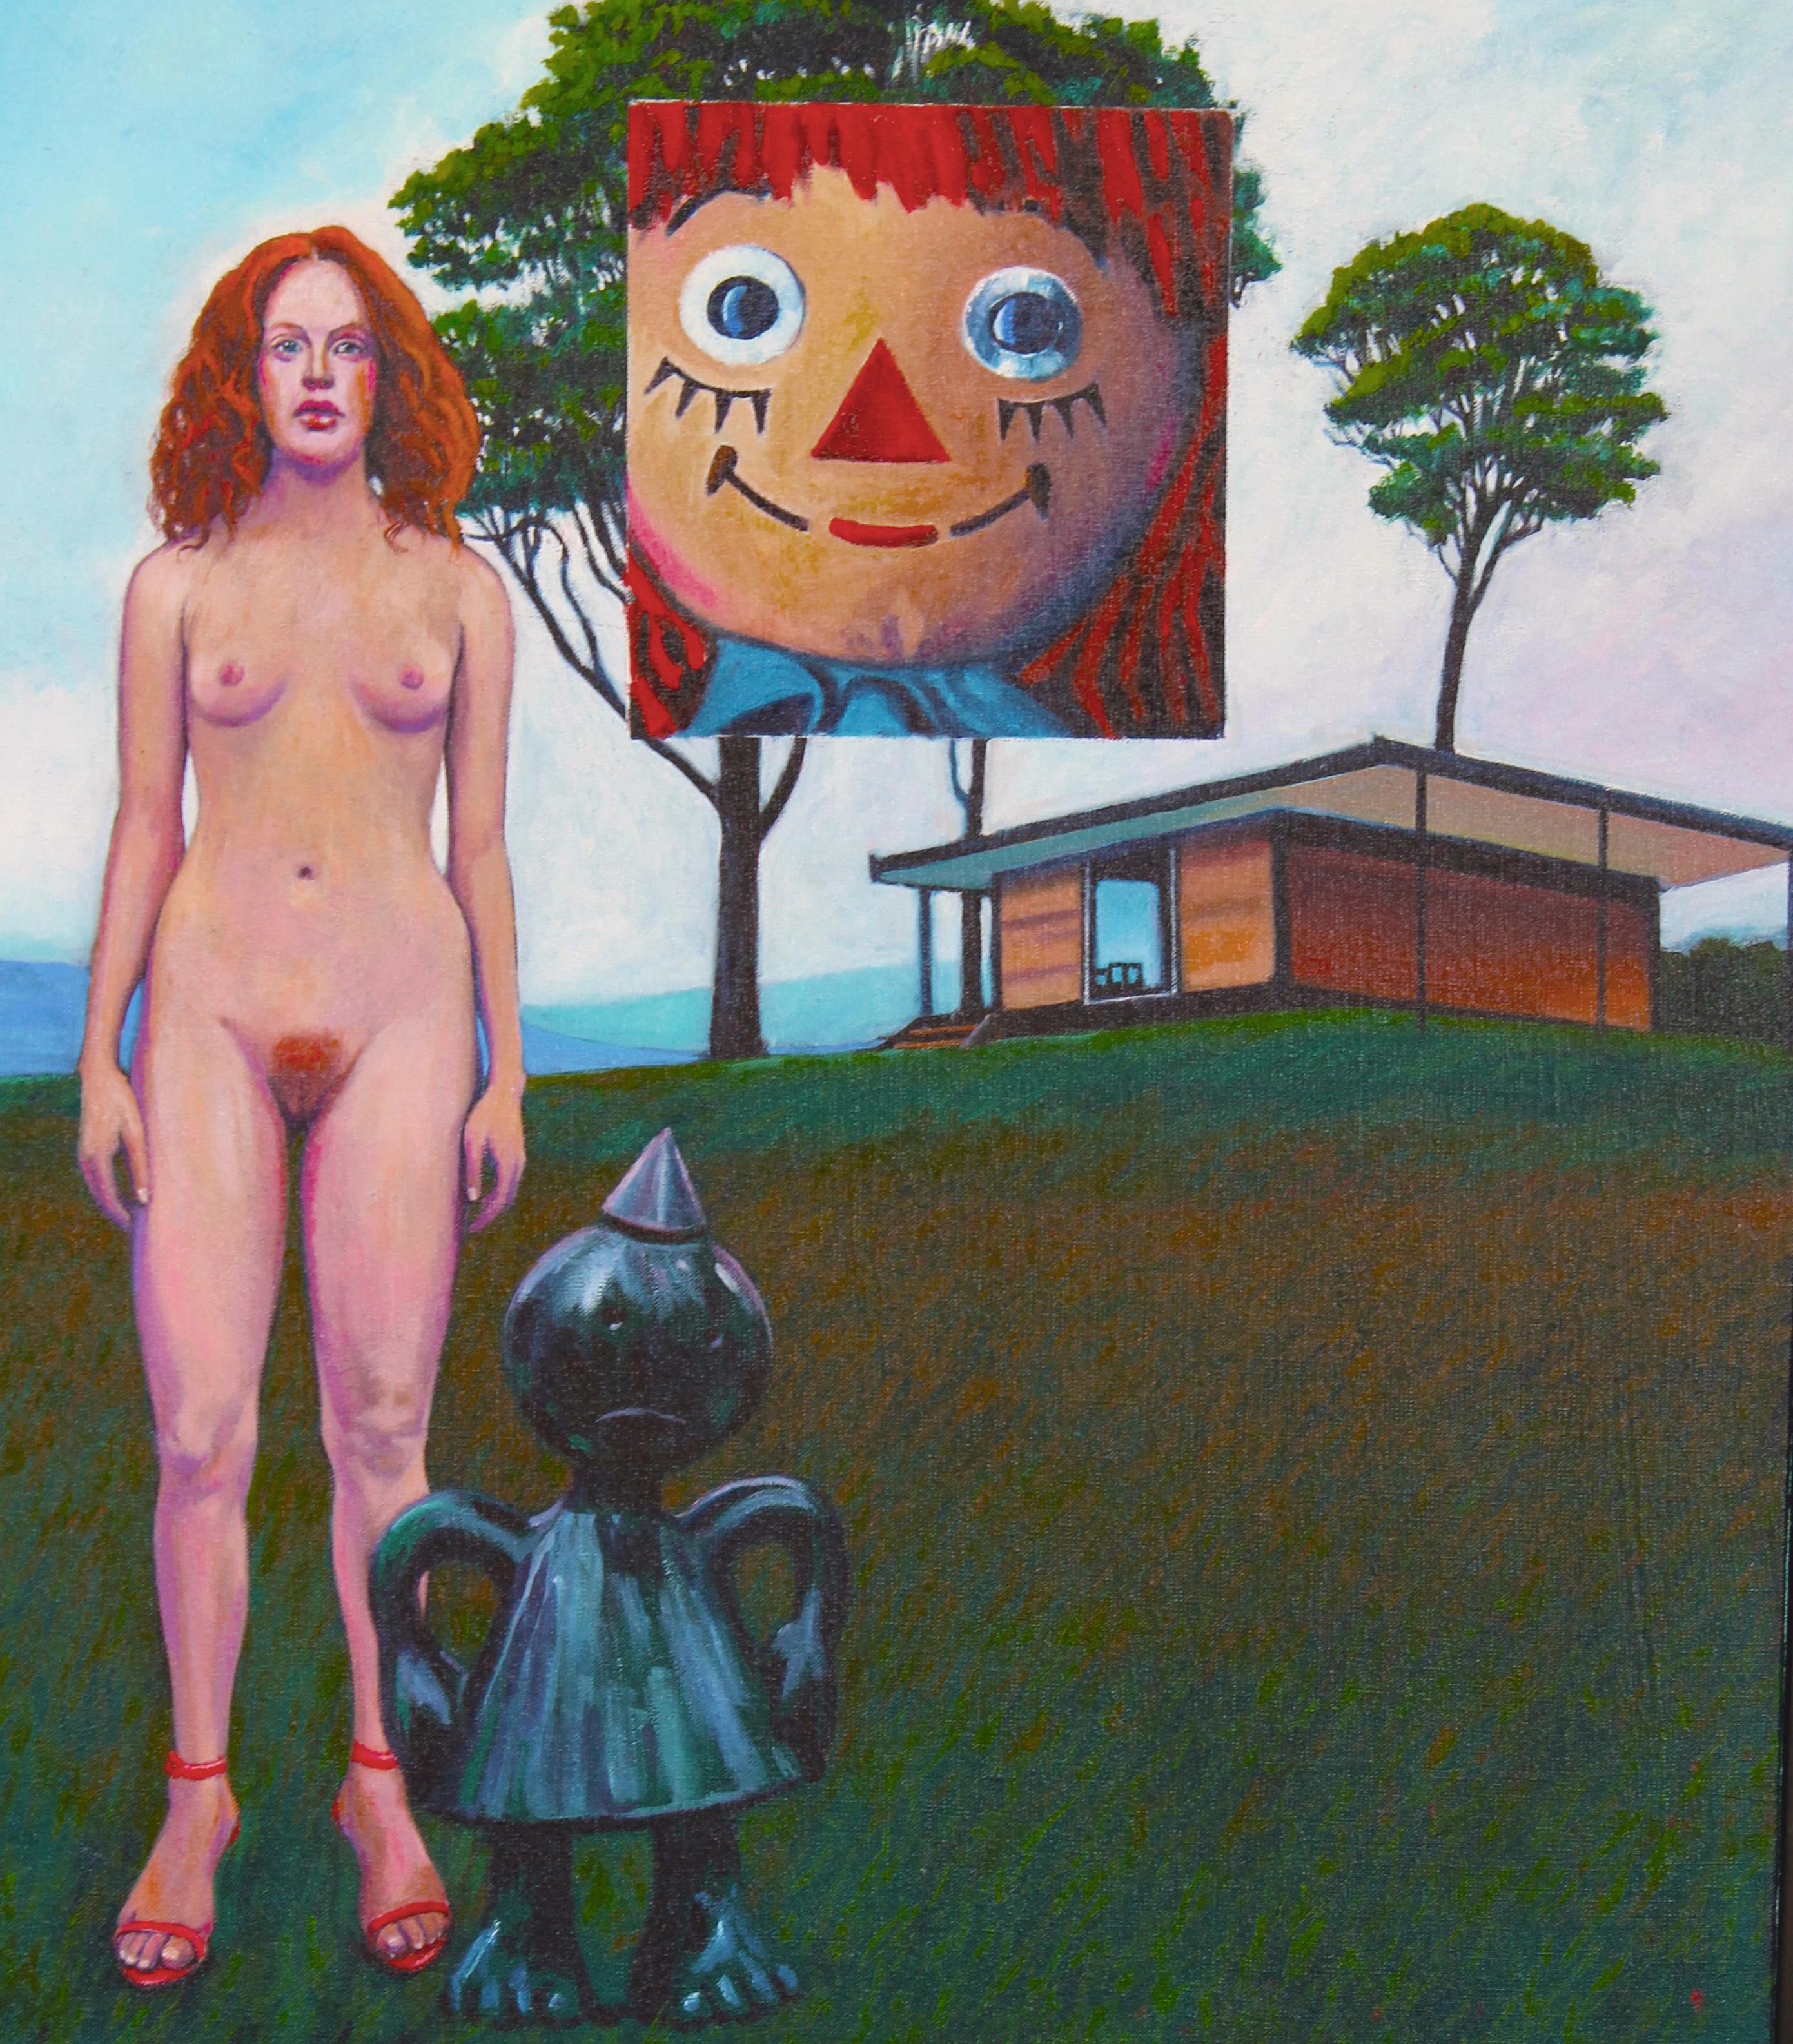 This 32" x 28" oil on canvas painting, 'Midcentury Science of Material Traces,'  by artist George Oswalt features a redheaded nude woman standing near a black toy figurine with the face of a Raggedy-Ann doll floating in the sky above her. In the